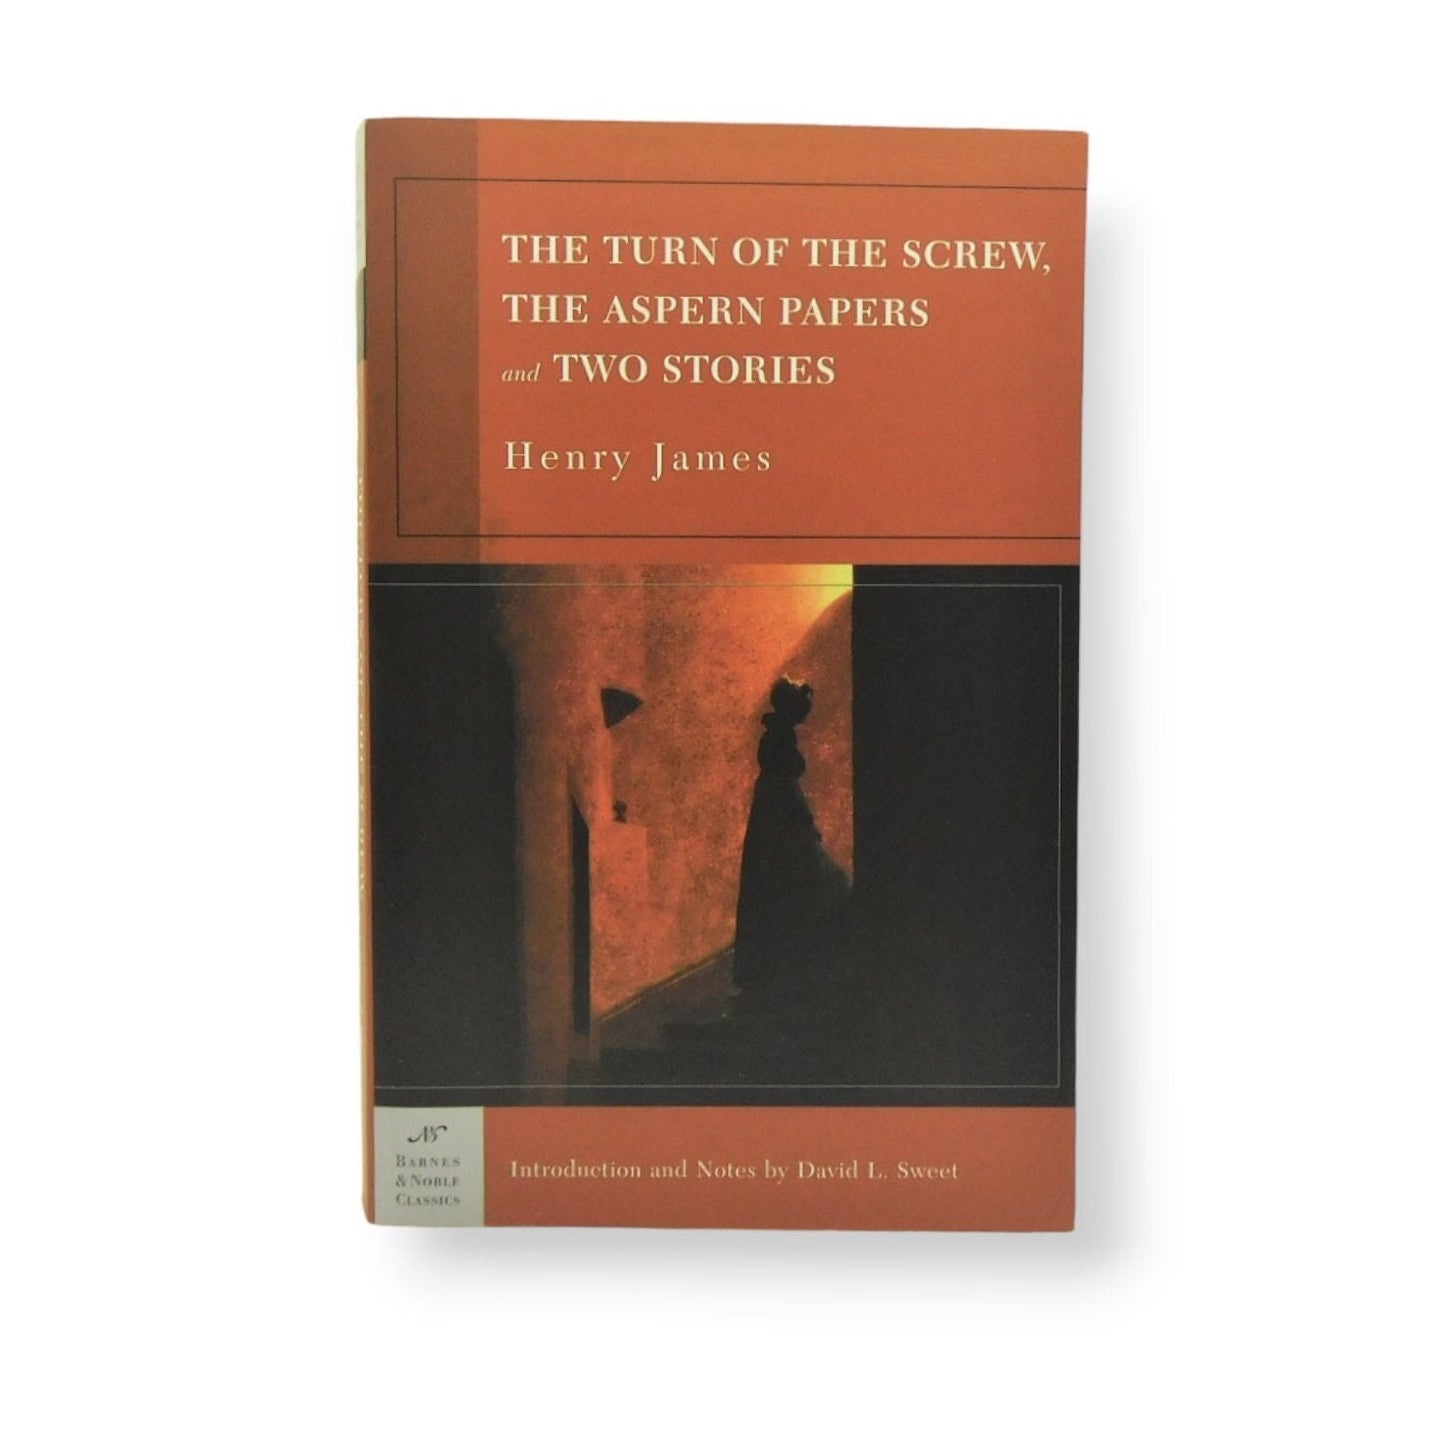 The Turn Of The Screw, The Aspern Papers and Two Stories by Henry James 2003